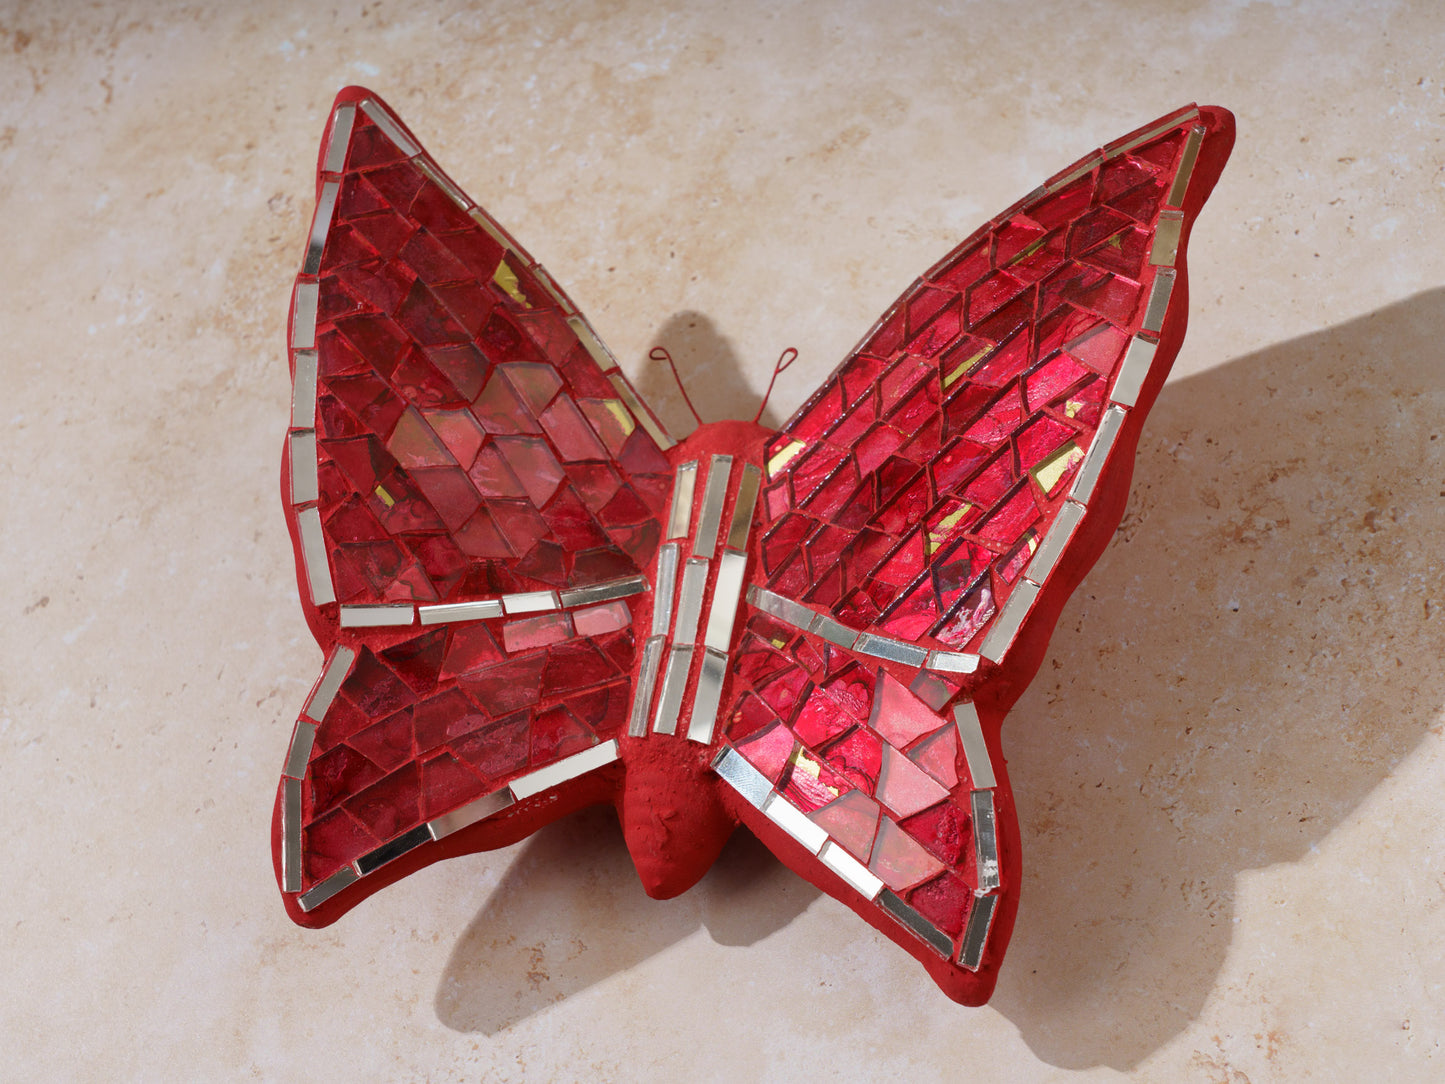 Mosaic Butterfly Wall Art - Red - Multiple Sizes